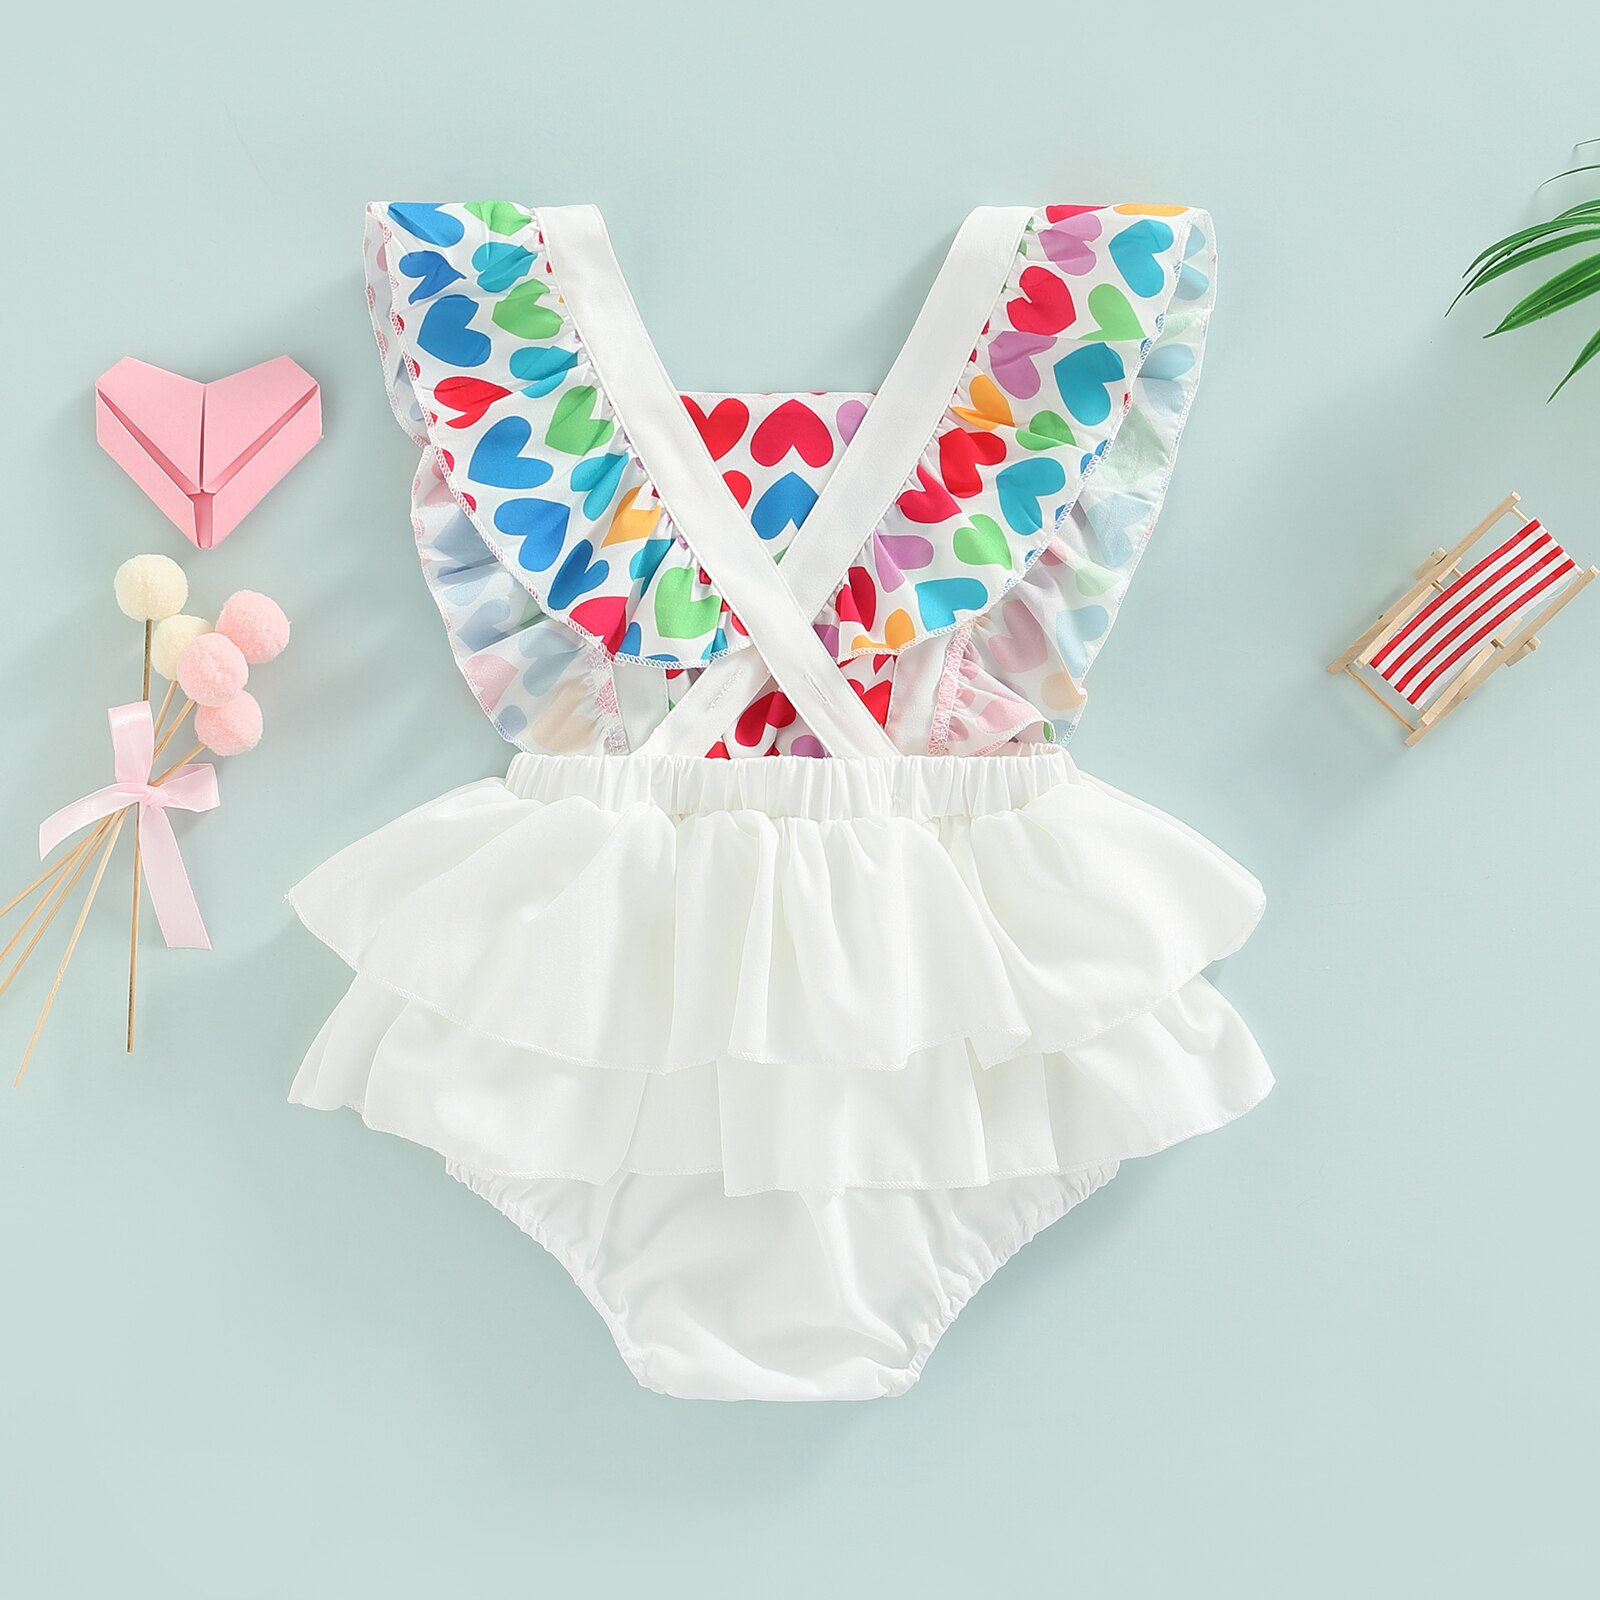 Newborn-Baby-Girl-Flying-Sleeve-Romper-Colorful-Hearts-Printed-Square-Neck-Bowknot-Ruffles-Bodysuit-Jumpsuit-Summer-5